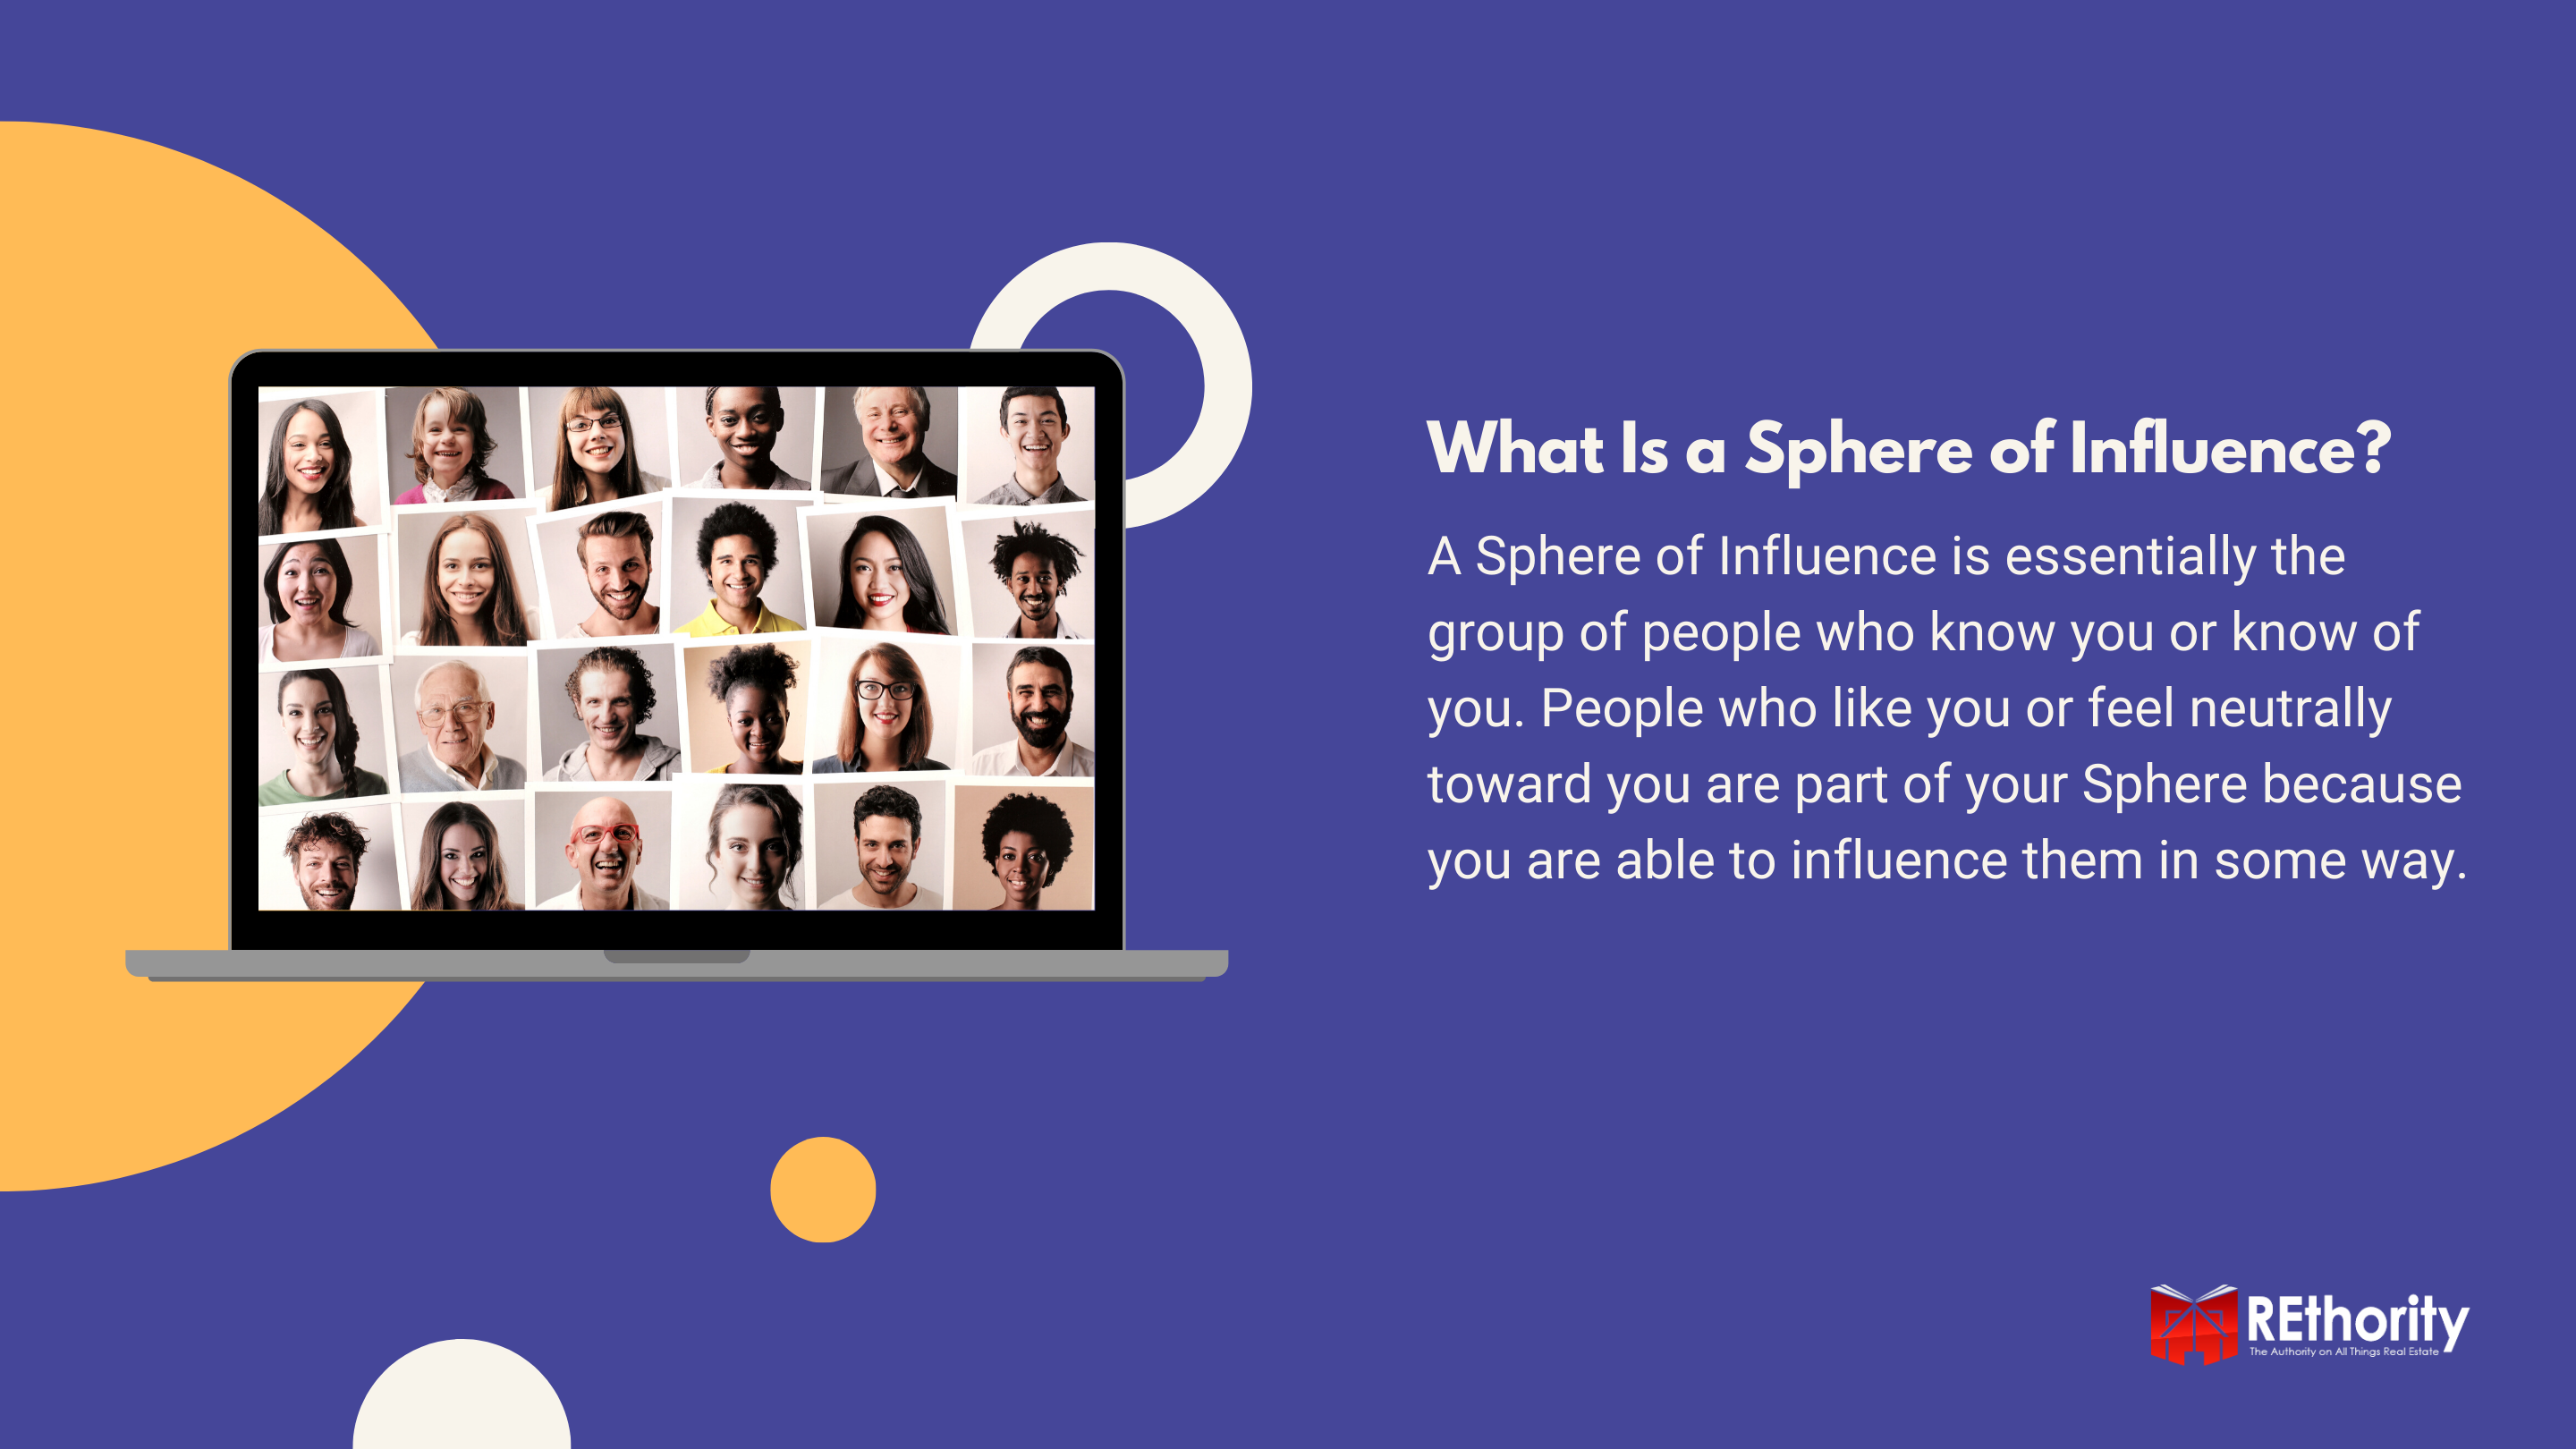 What Is a Sphere of Influence with photos of one's social network displayed on a laptop